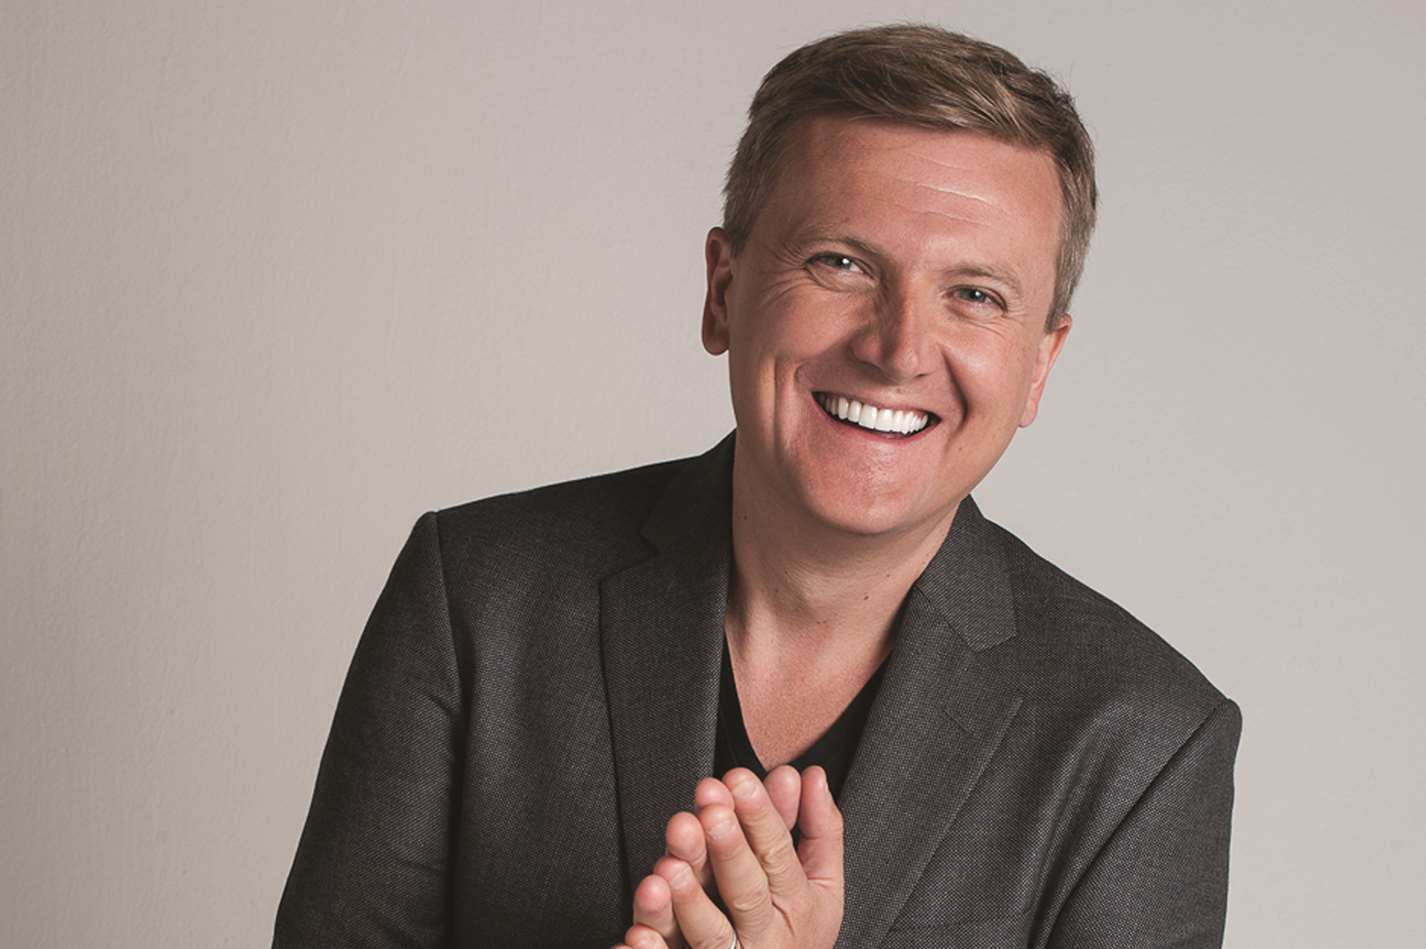 Aled Jones, who will be narrating the Leeds Castle Classical Concert